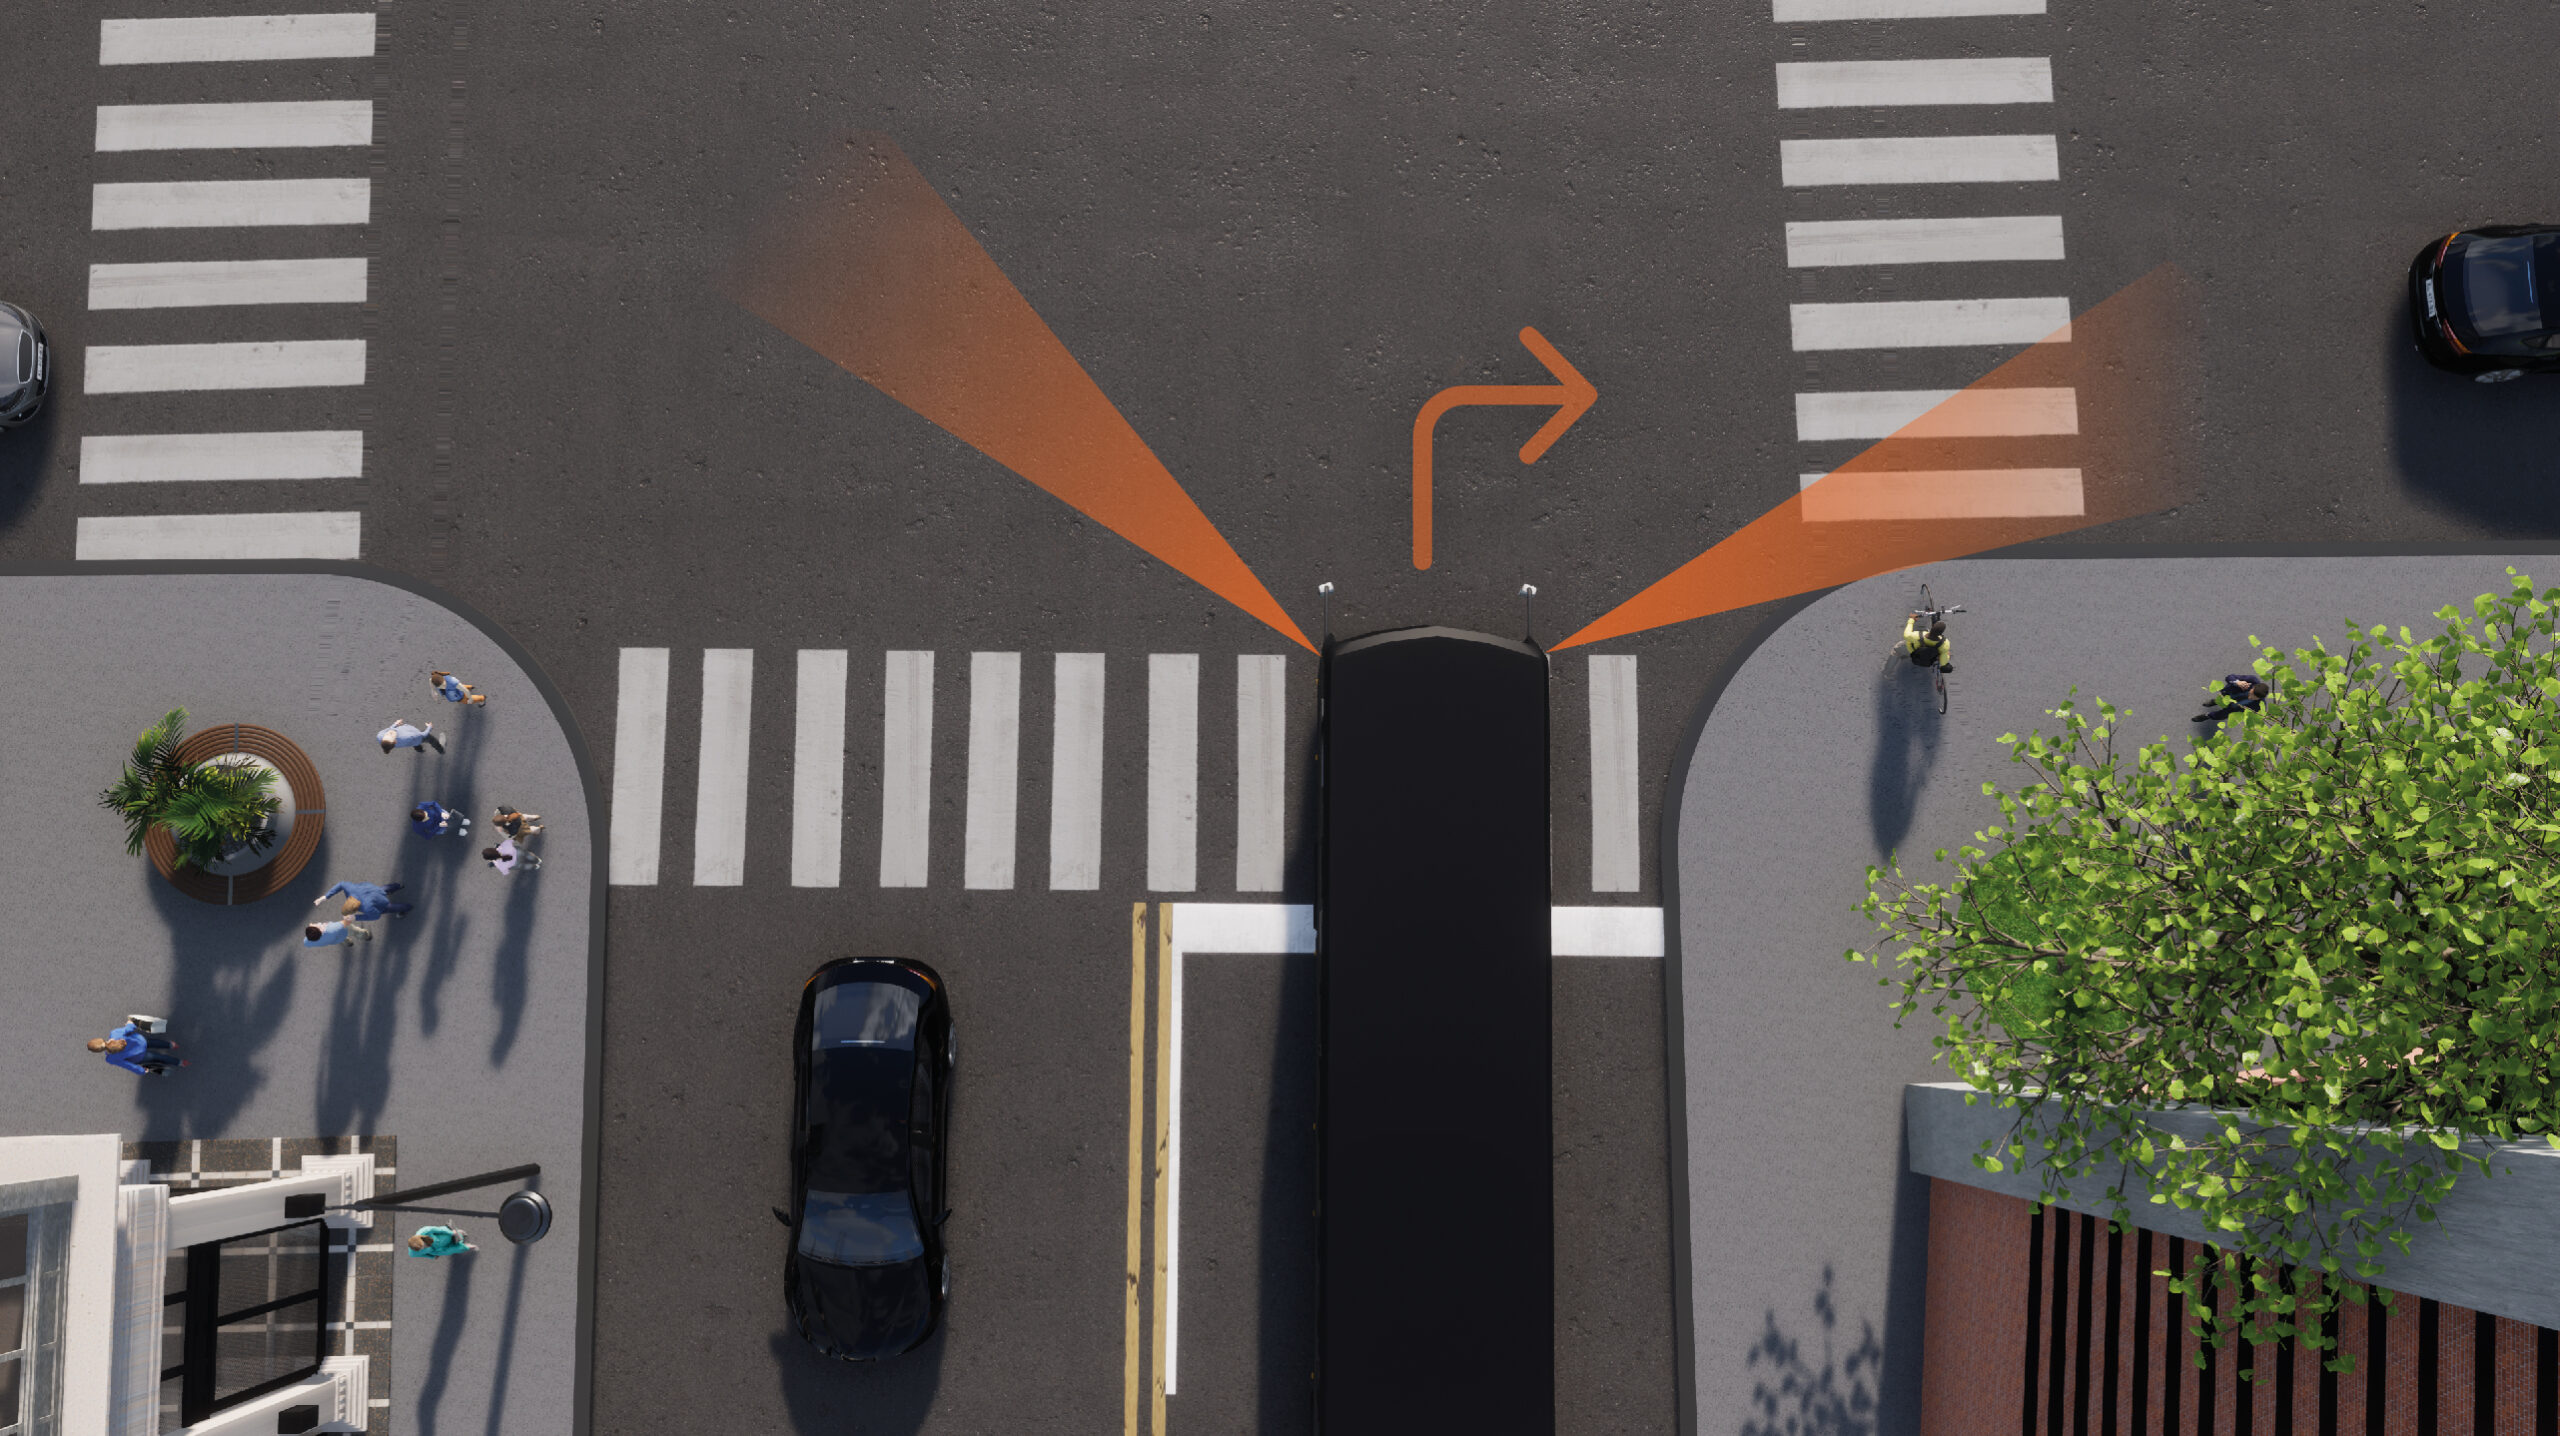 Blind Spots most critical during a right turn